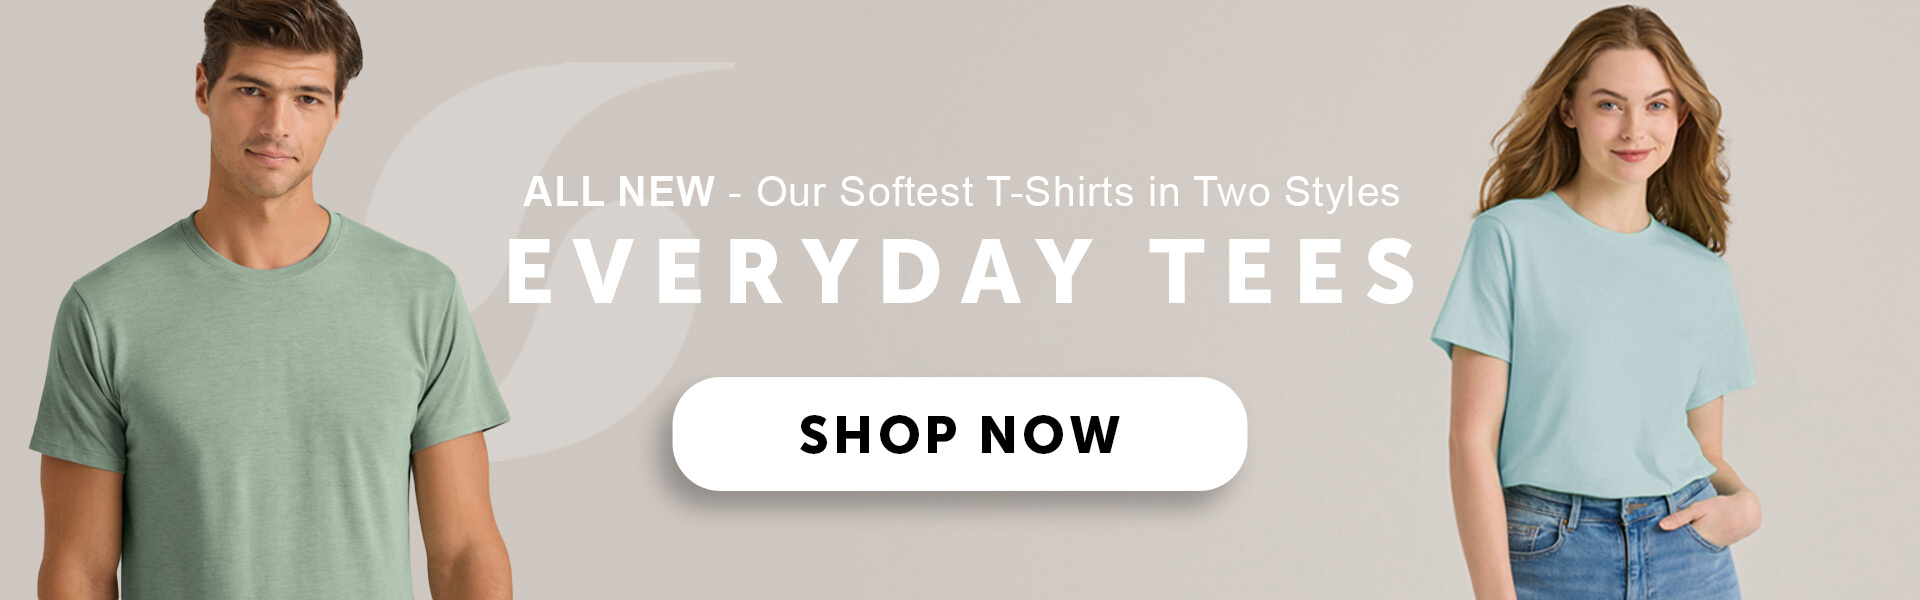 shop soffe everyday tee shirts our softest yet